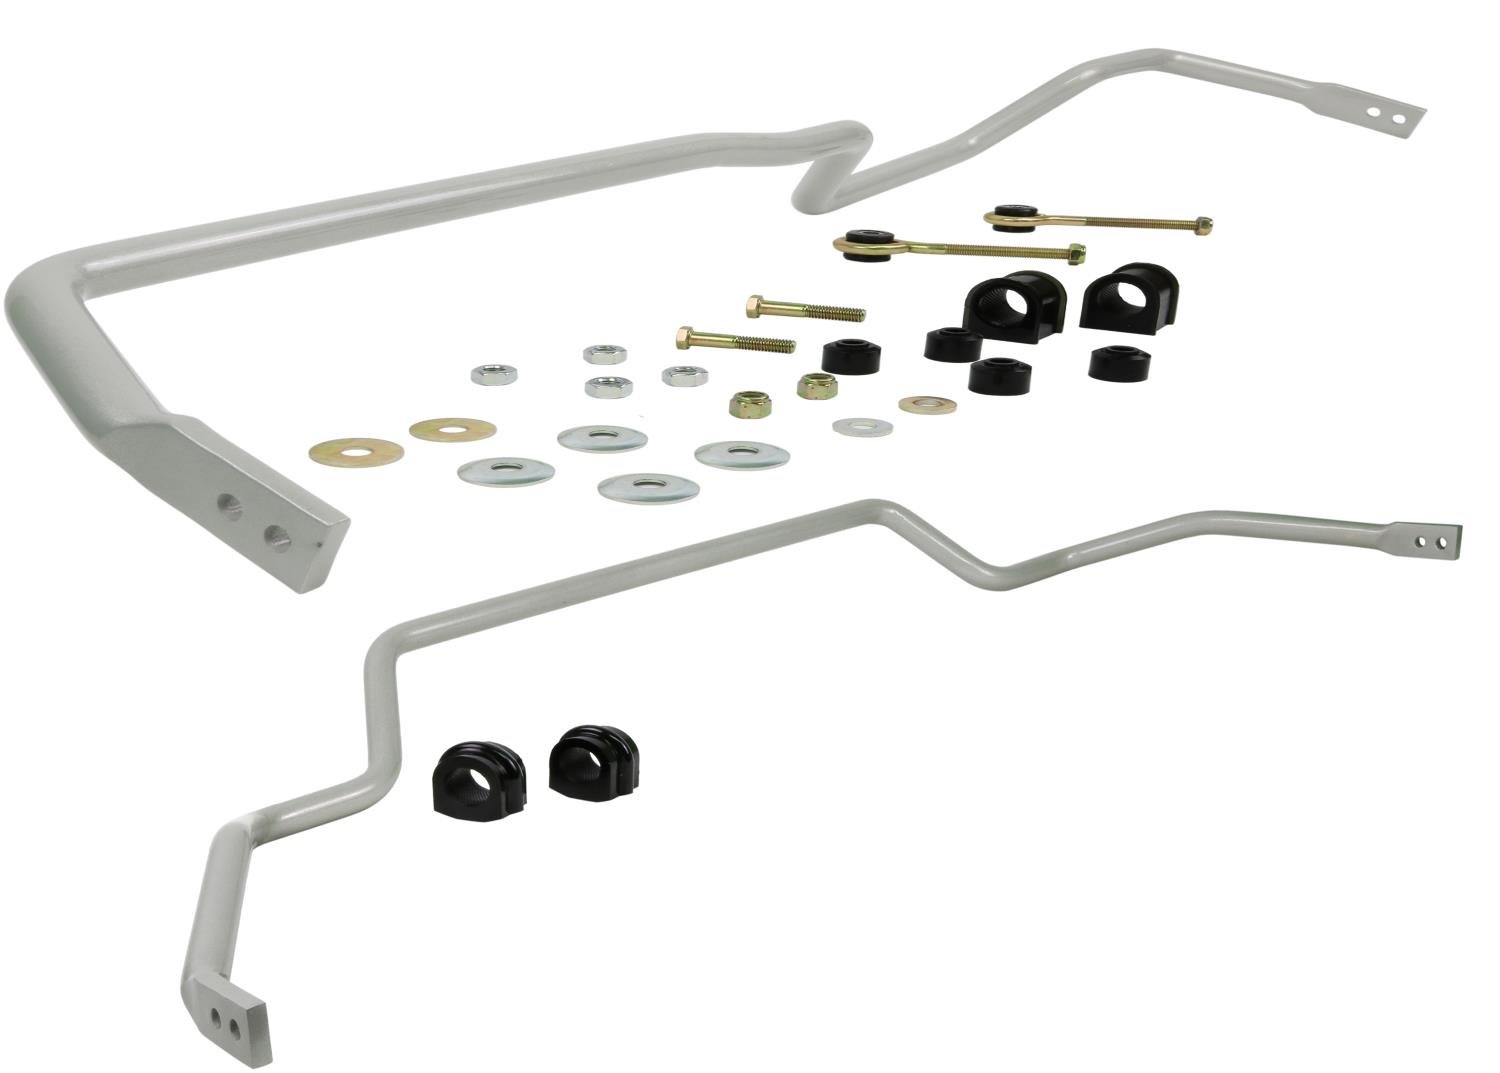 BNK013 Front and Rear Sway Bar Kit 24 mm for 1988-1994 Nissan Skyline R32 GTS, GTS-T RWD